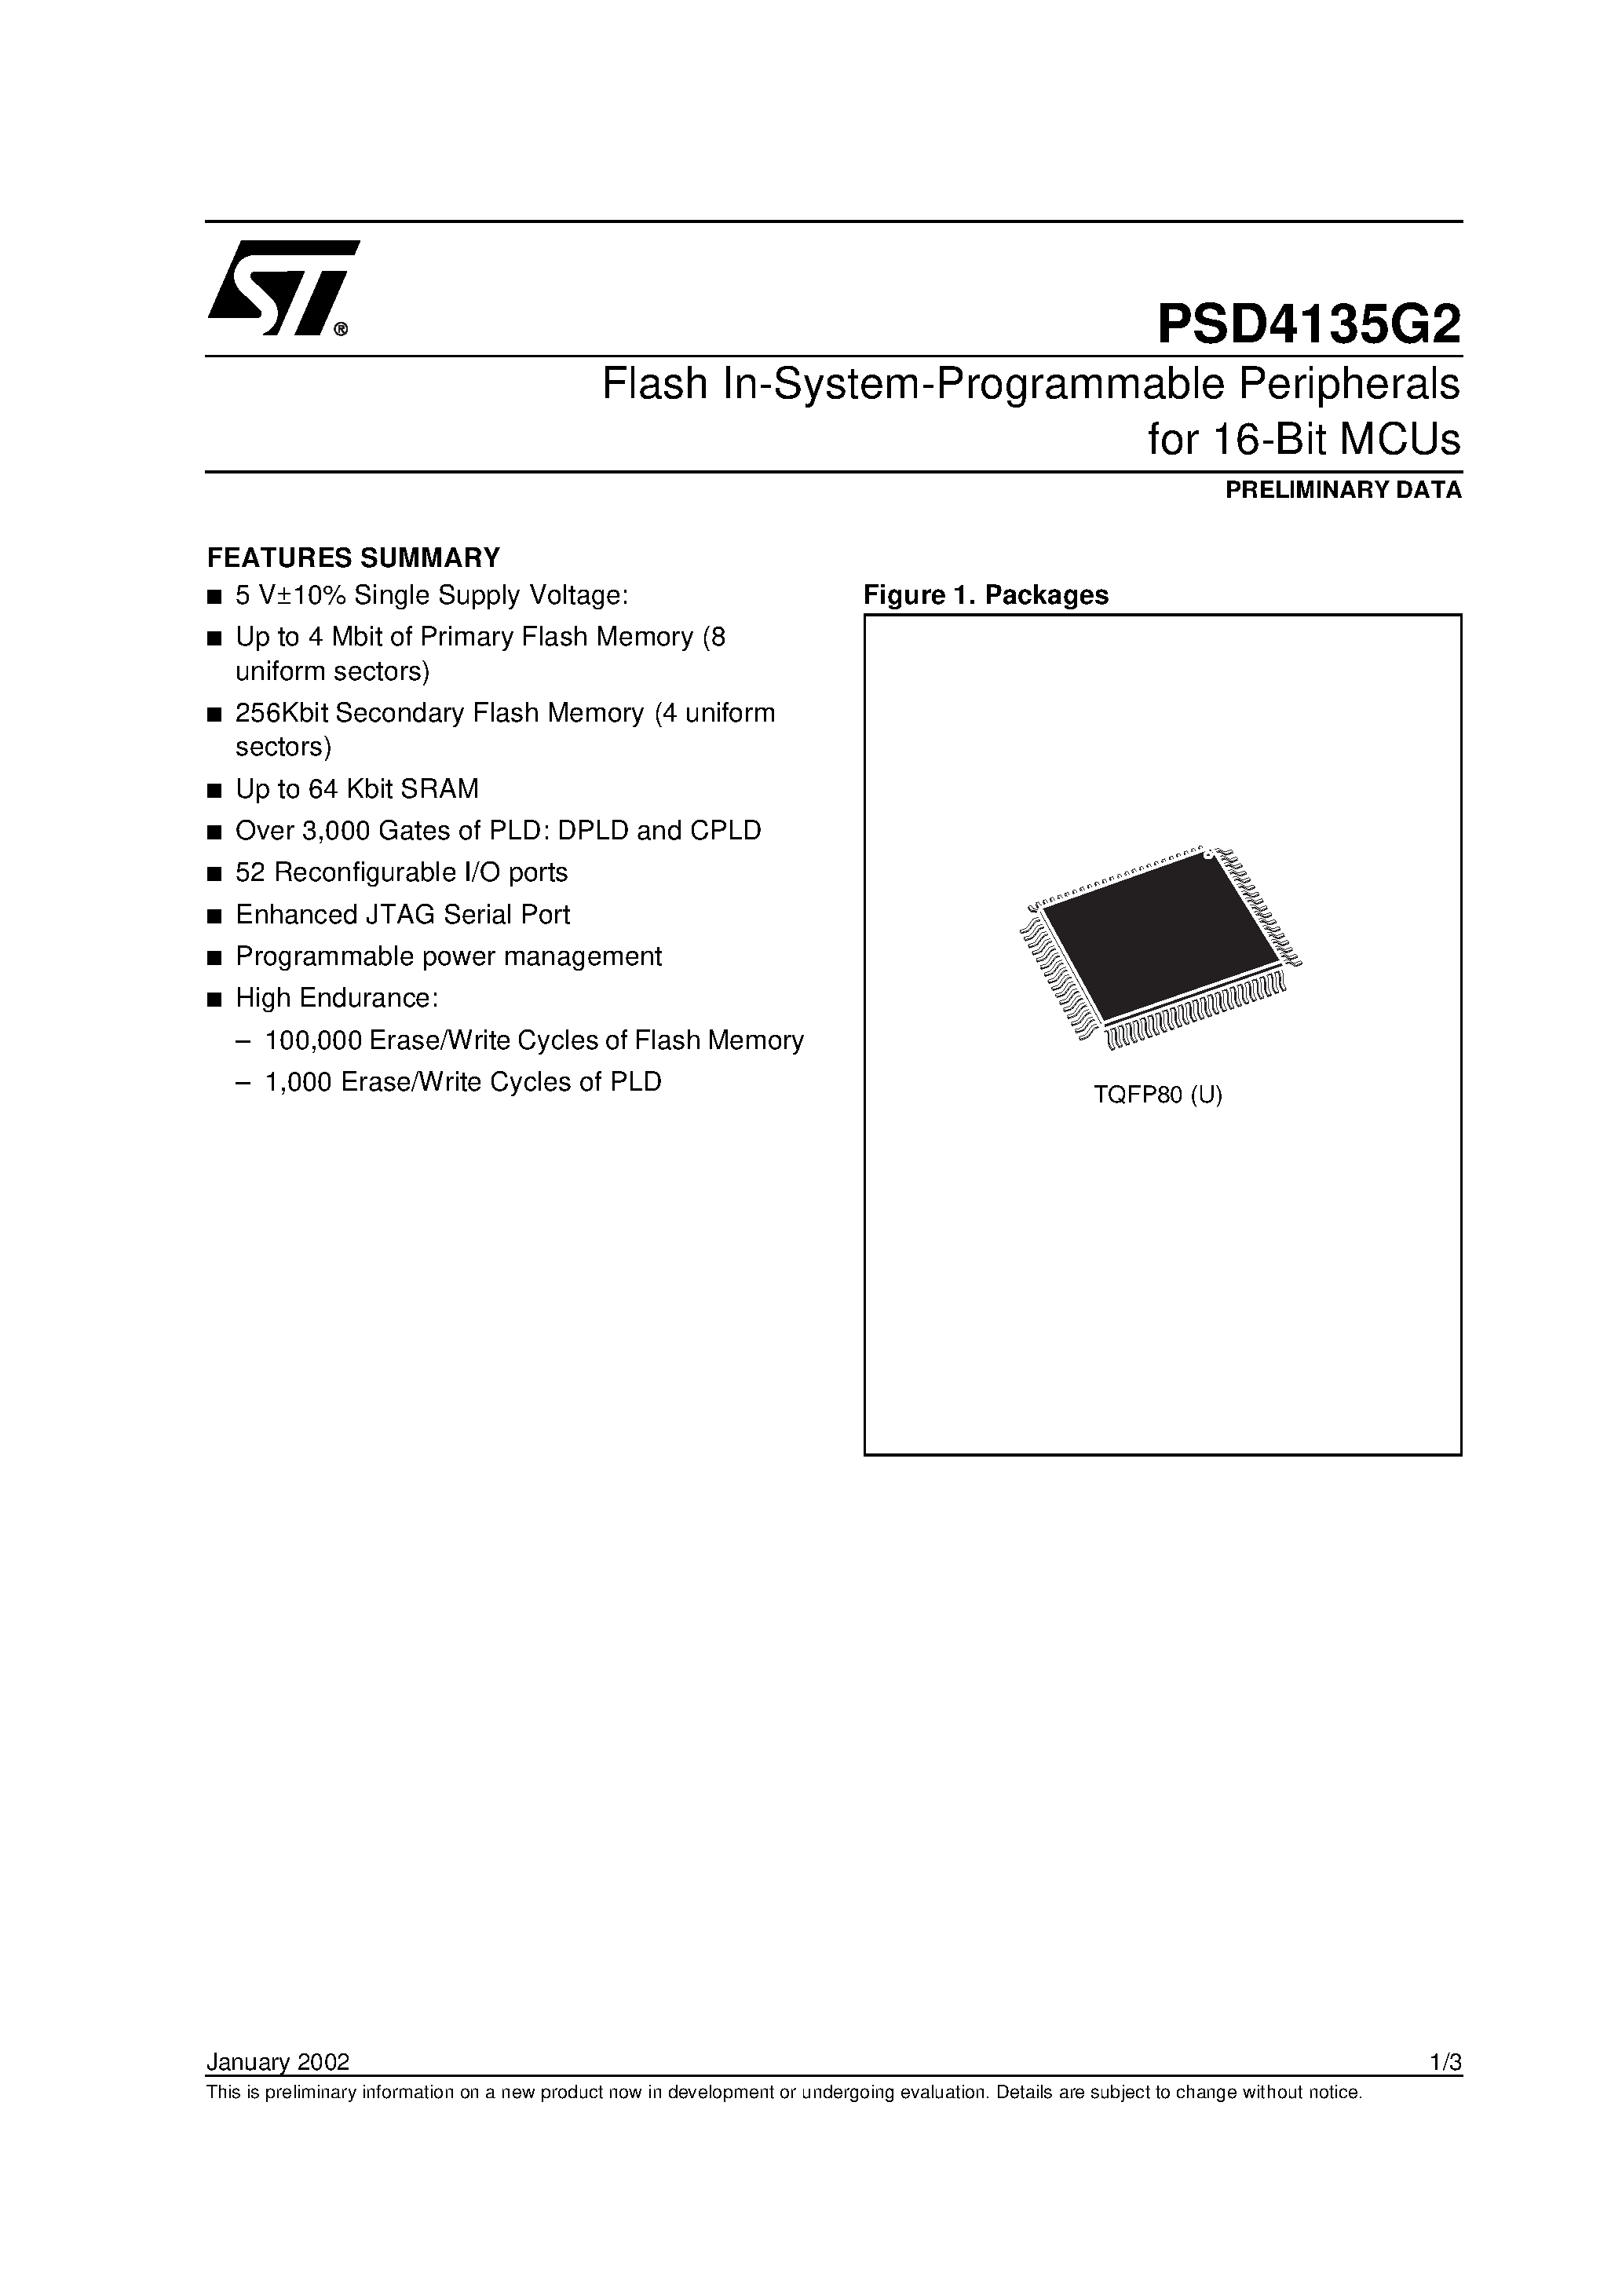 Даташит PSD4135F1-B-12J - Flash In-System-Programmable Peripherals for 16-Bit MCUs страница 1